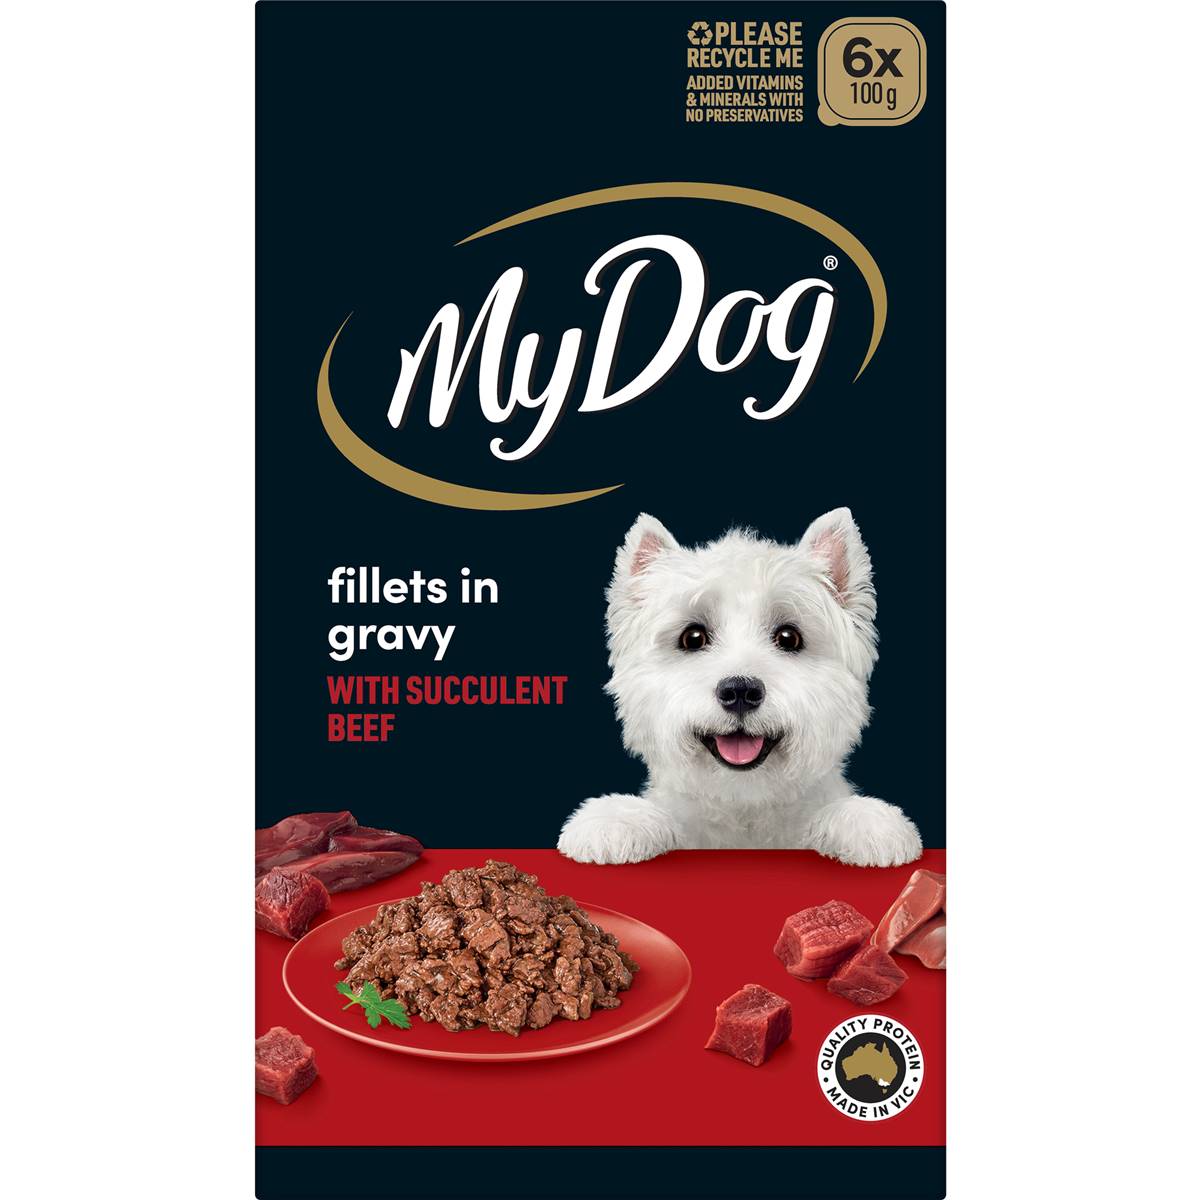 My Dog Fillets In Gravy With Succulent Beef Wet Dog Food Trays 6x100g